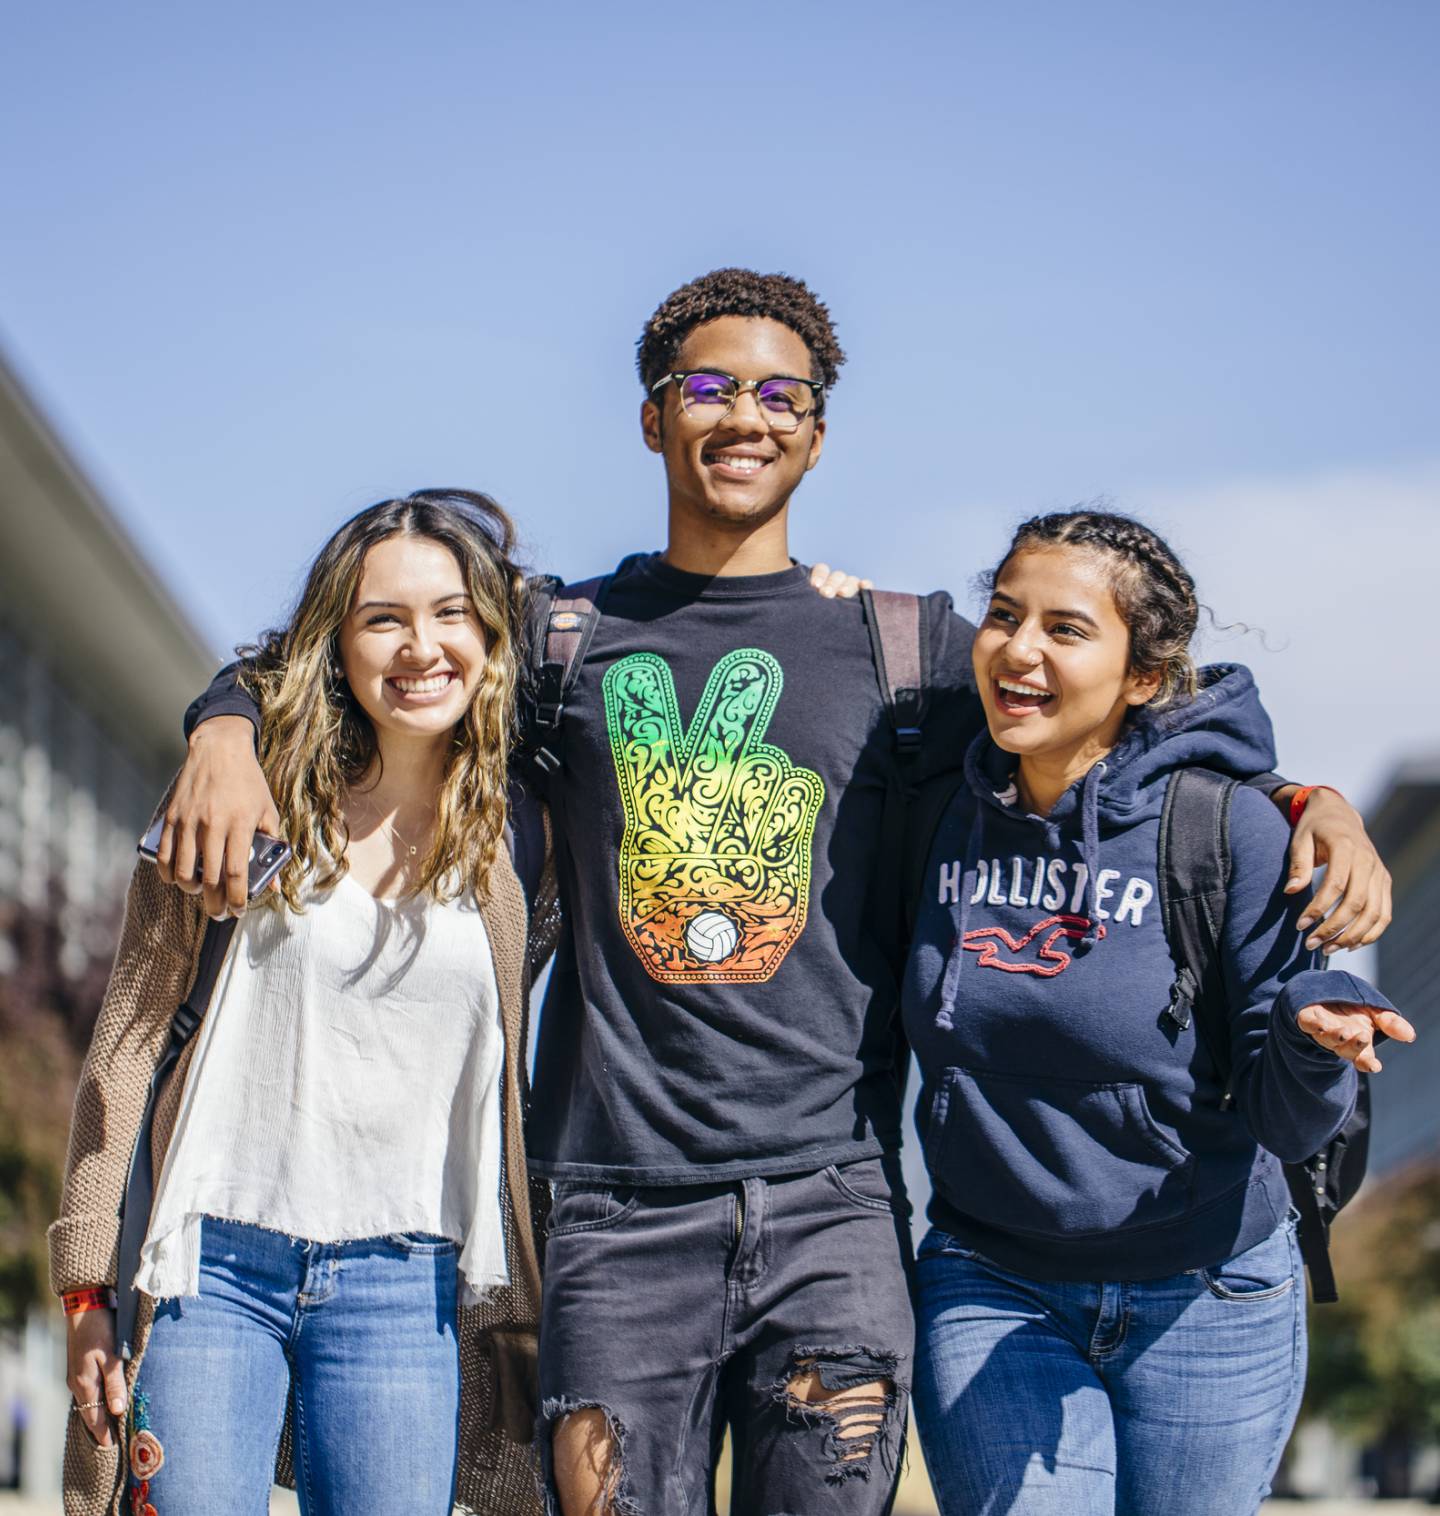 Three students walking together on campus